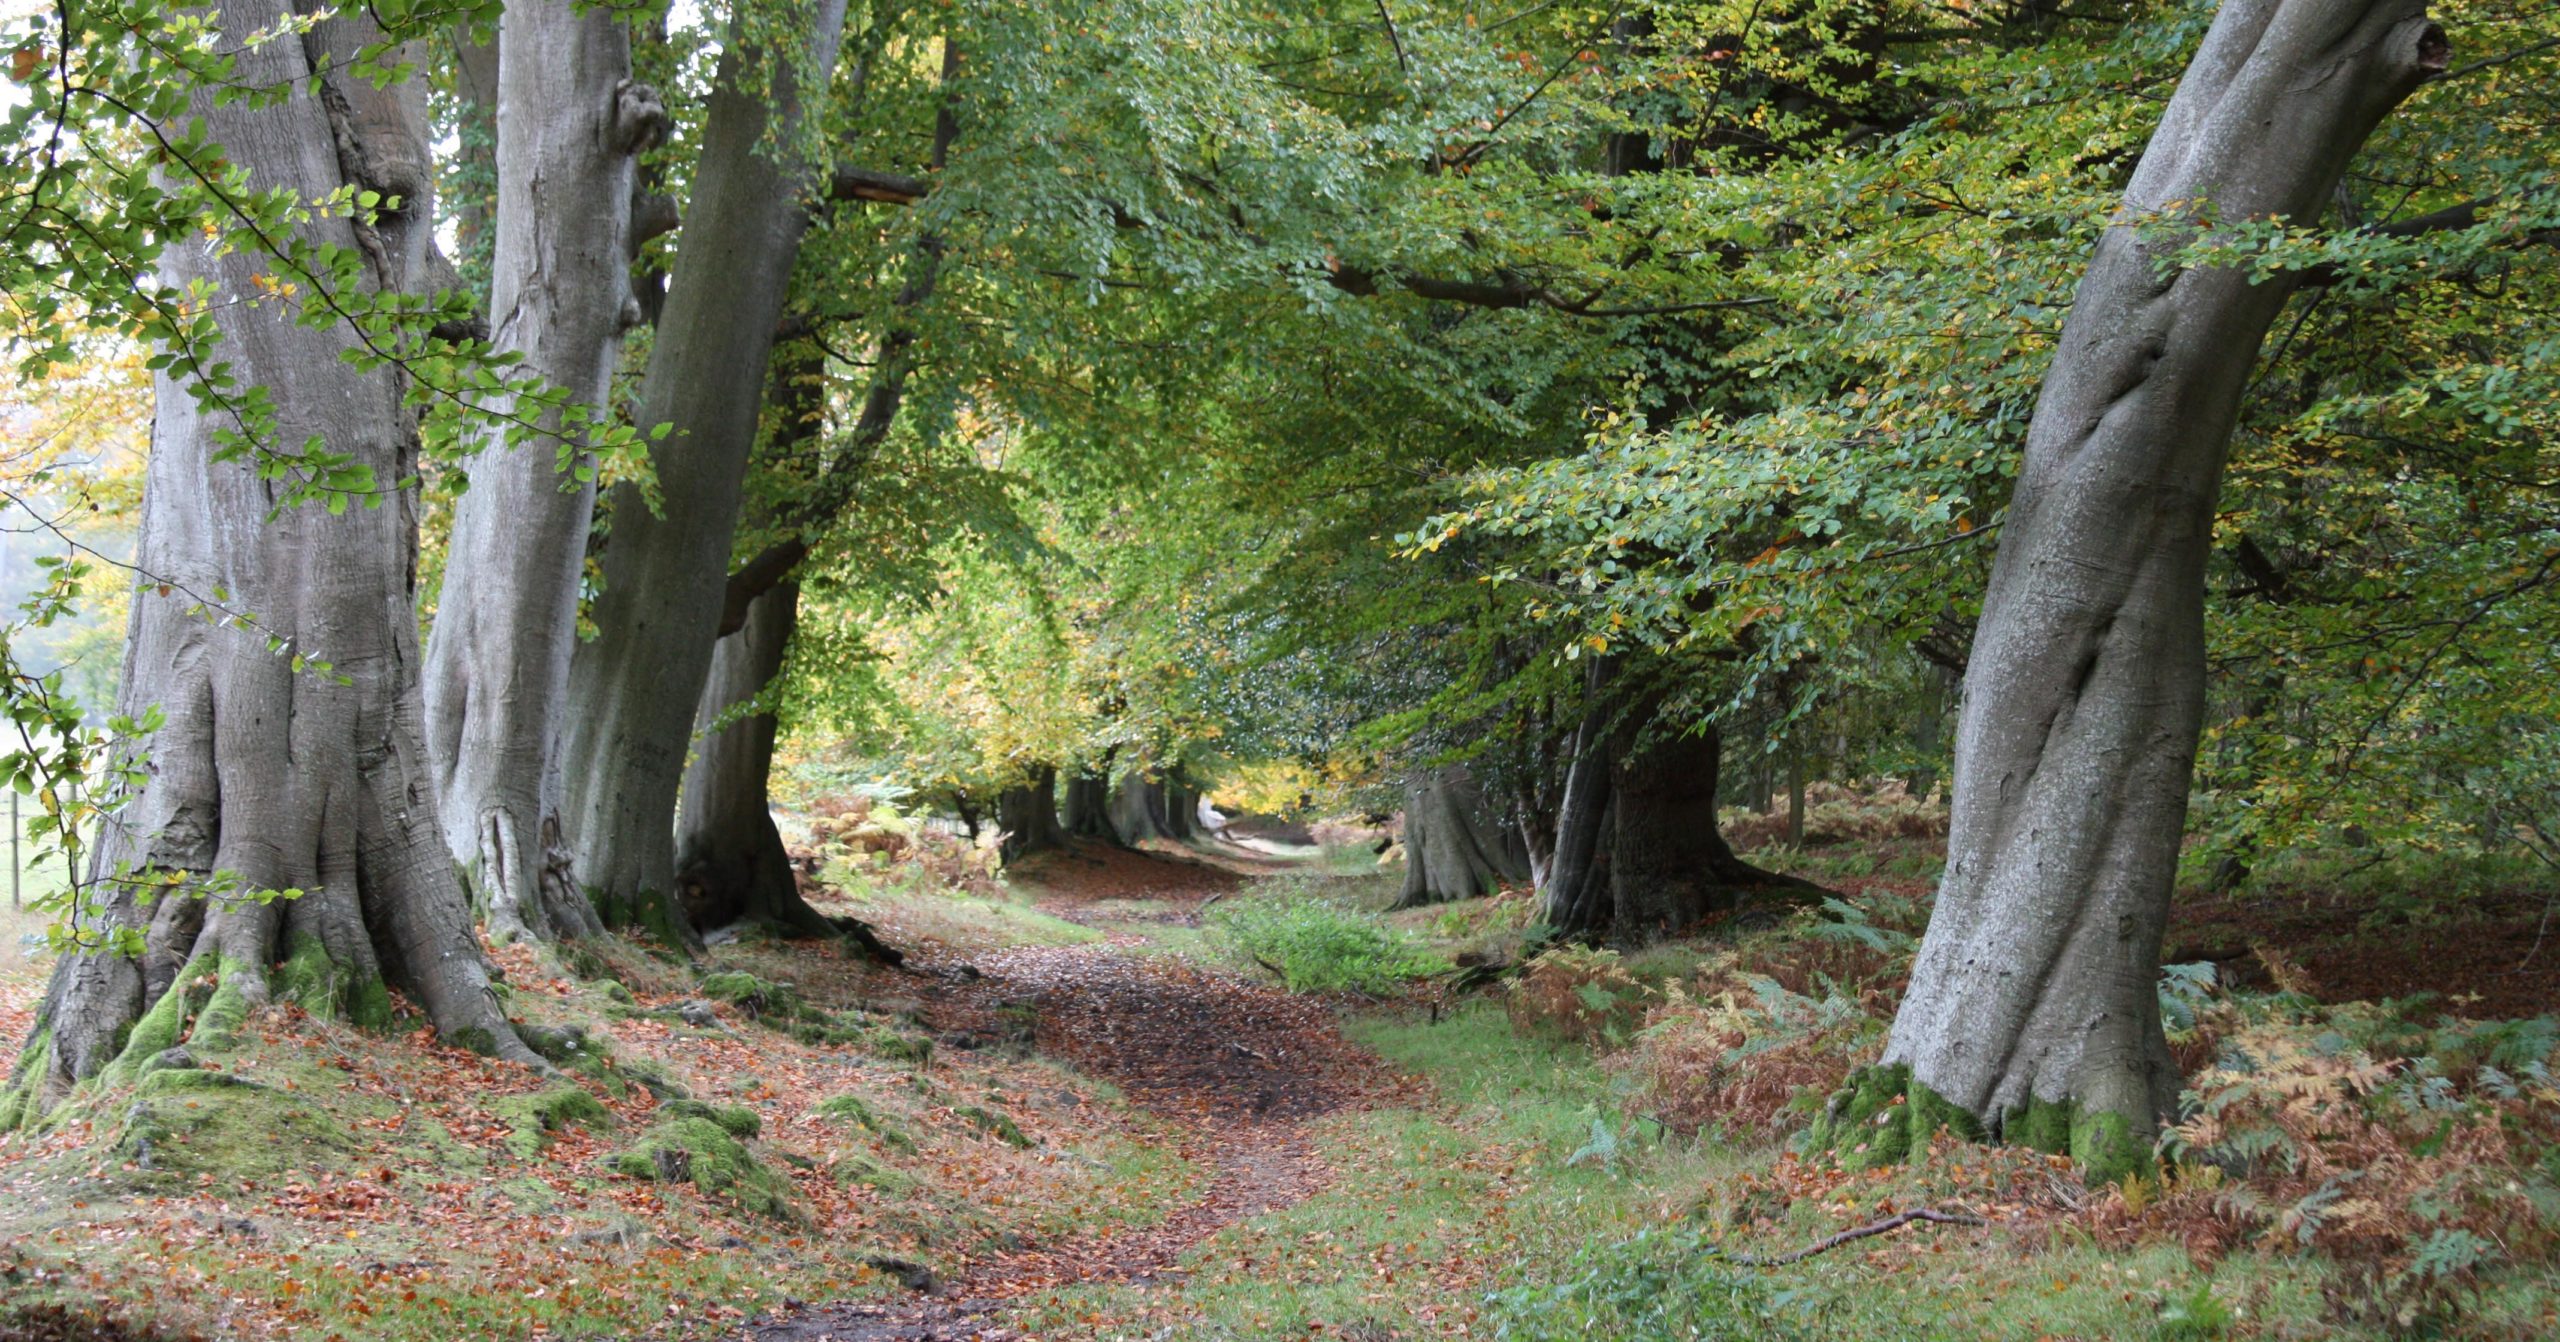 ancient beech trees in a lush green forest in ashridge within the chilterns beechwoods special area of conservation